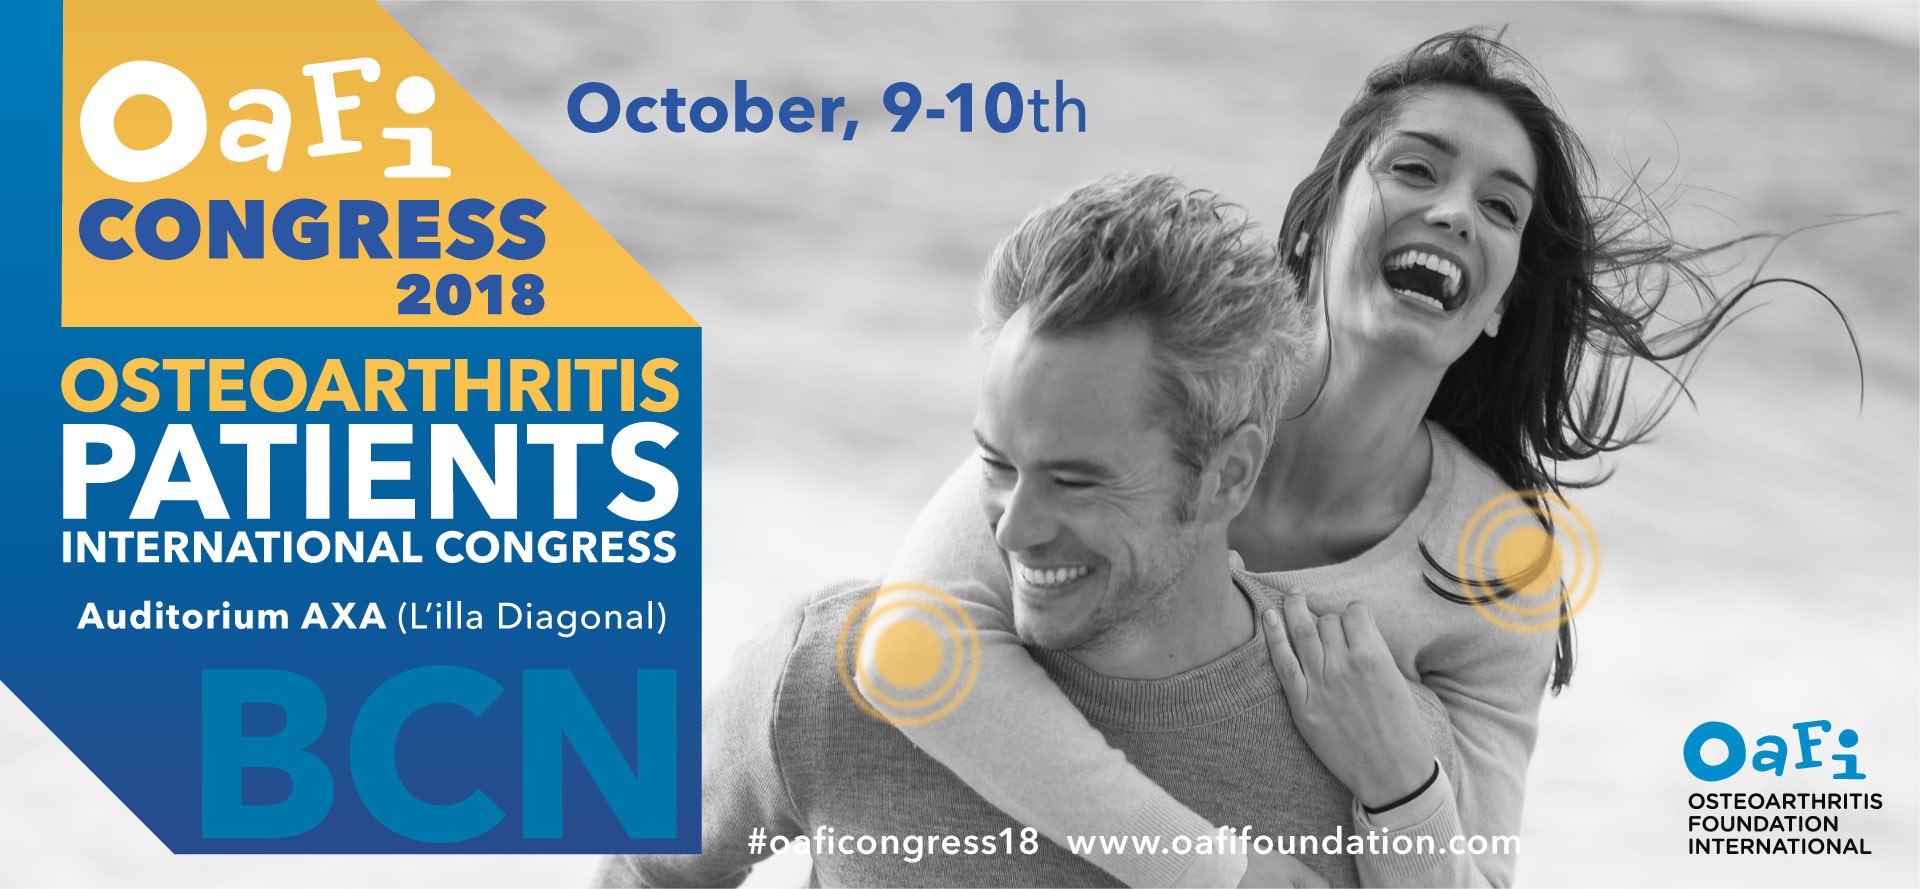 II International Congress for Patients with Osteoarthritis 2018